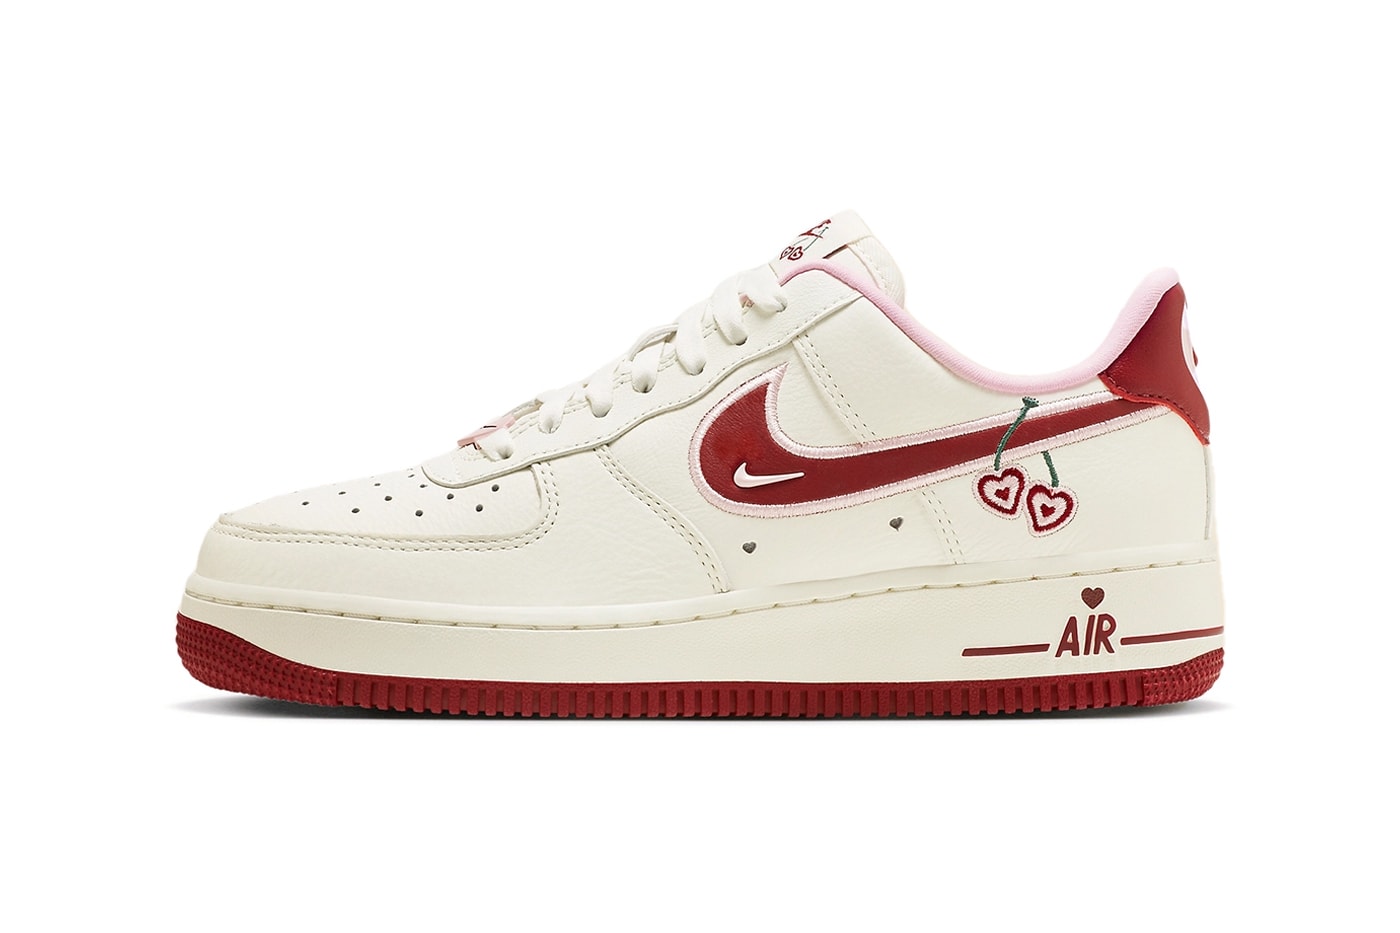 NIKE Air Force 1 '07 Basketball Shoes For Men - Buy NIKE Air Force 1 '07  Basketball Shoes For Men Online at Best Price - Shop Online for Footwears  in India